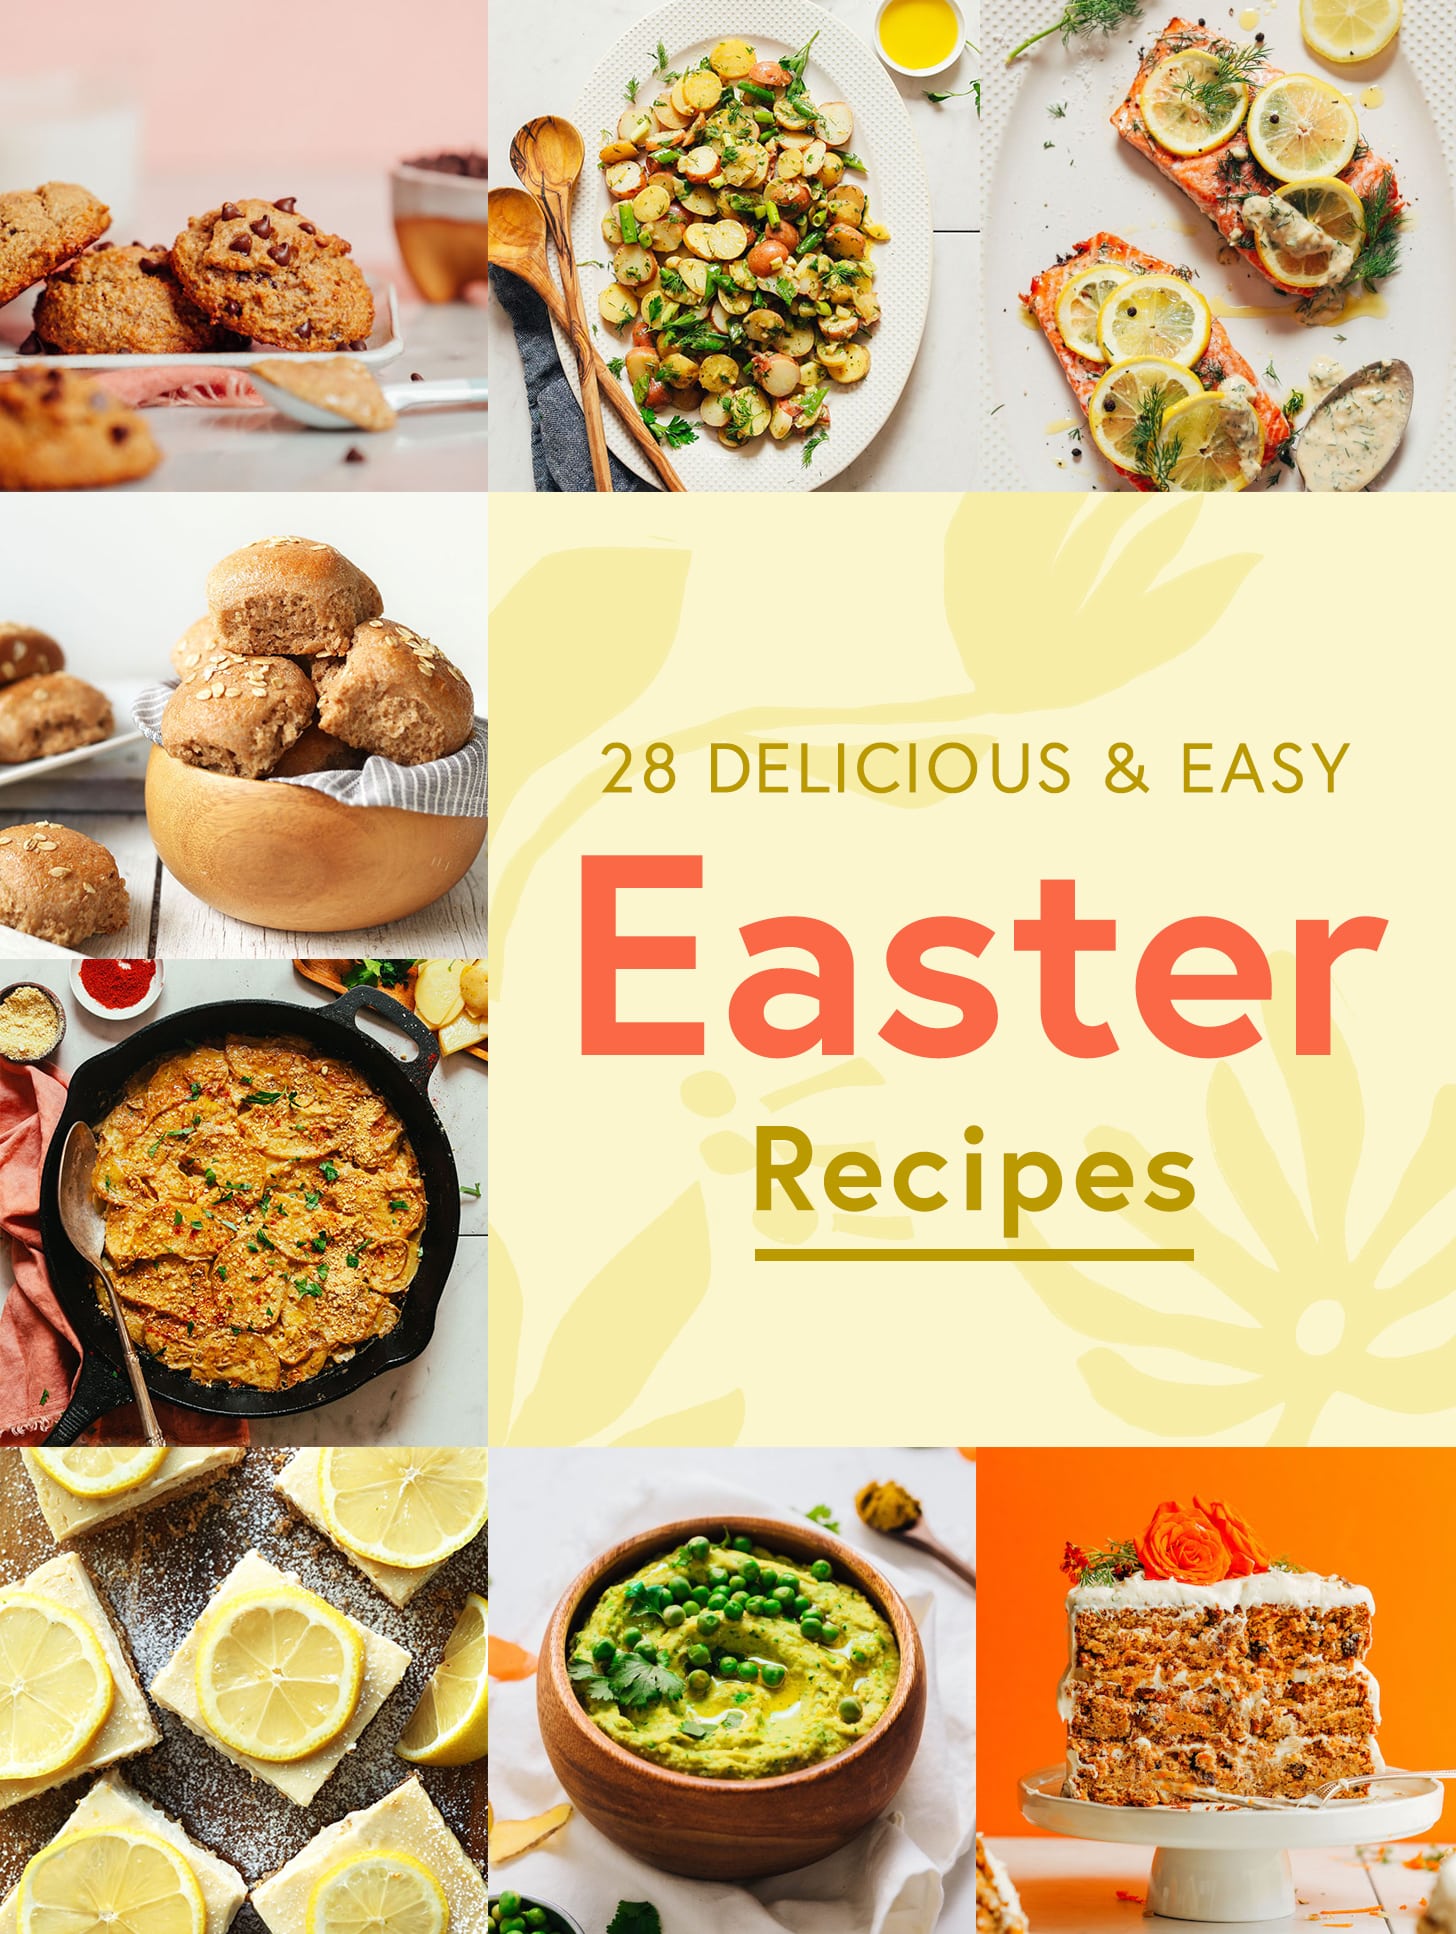 Cookies, potato salad, spelt rolls, and other Easter recipe ideas